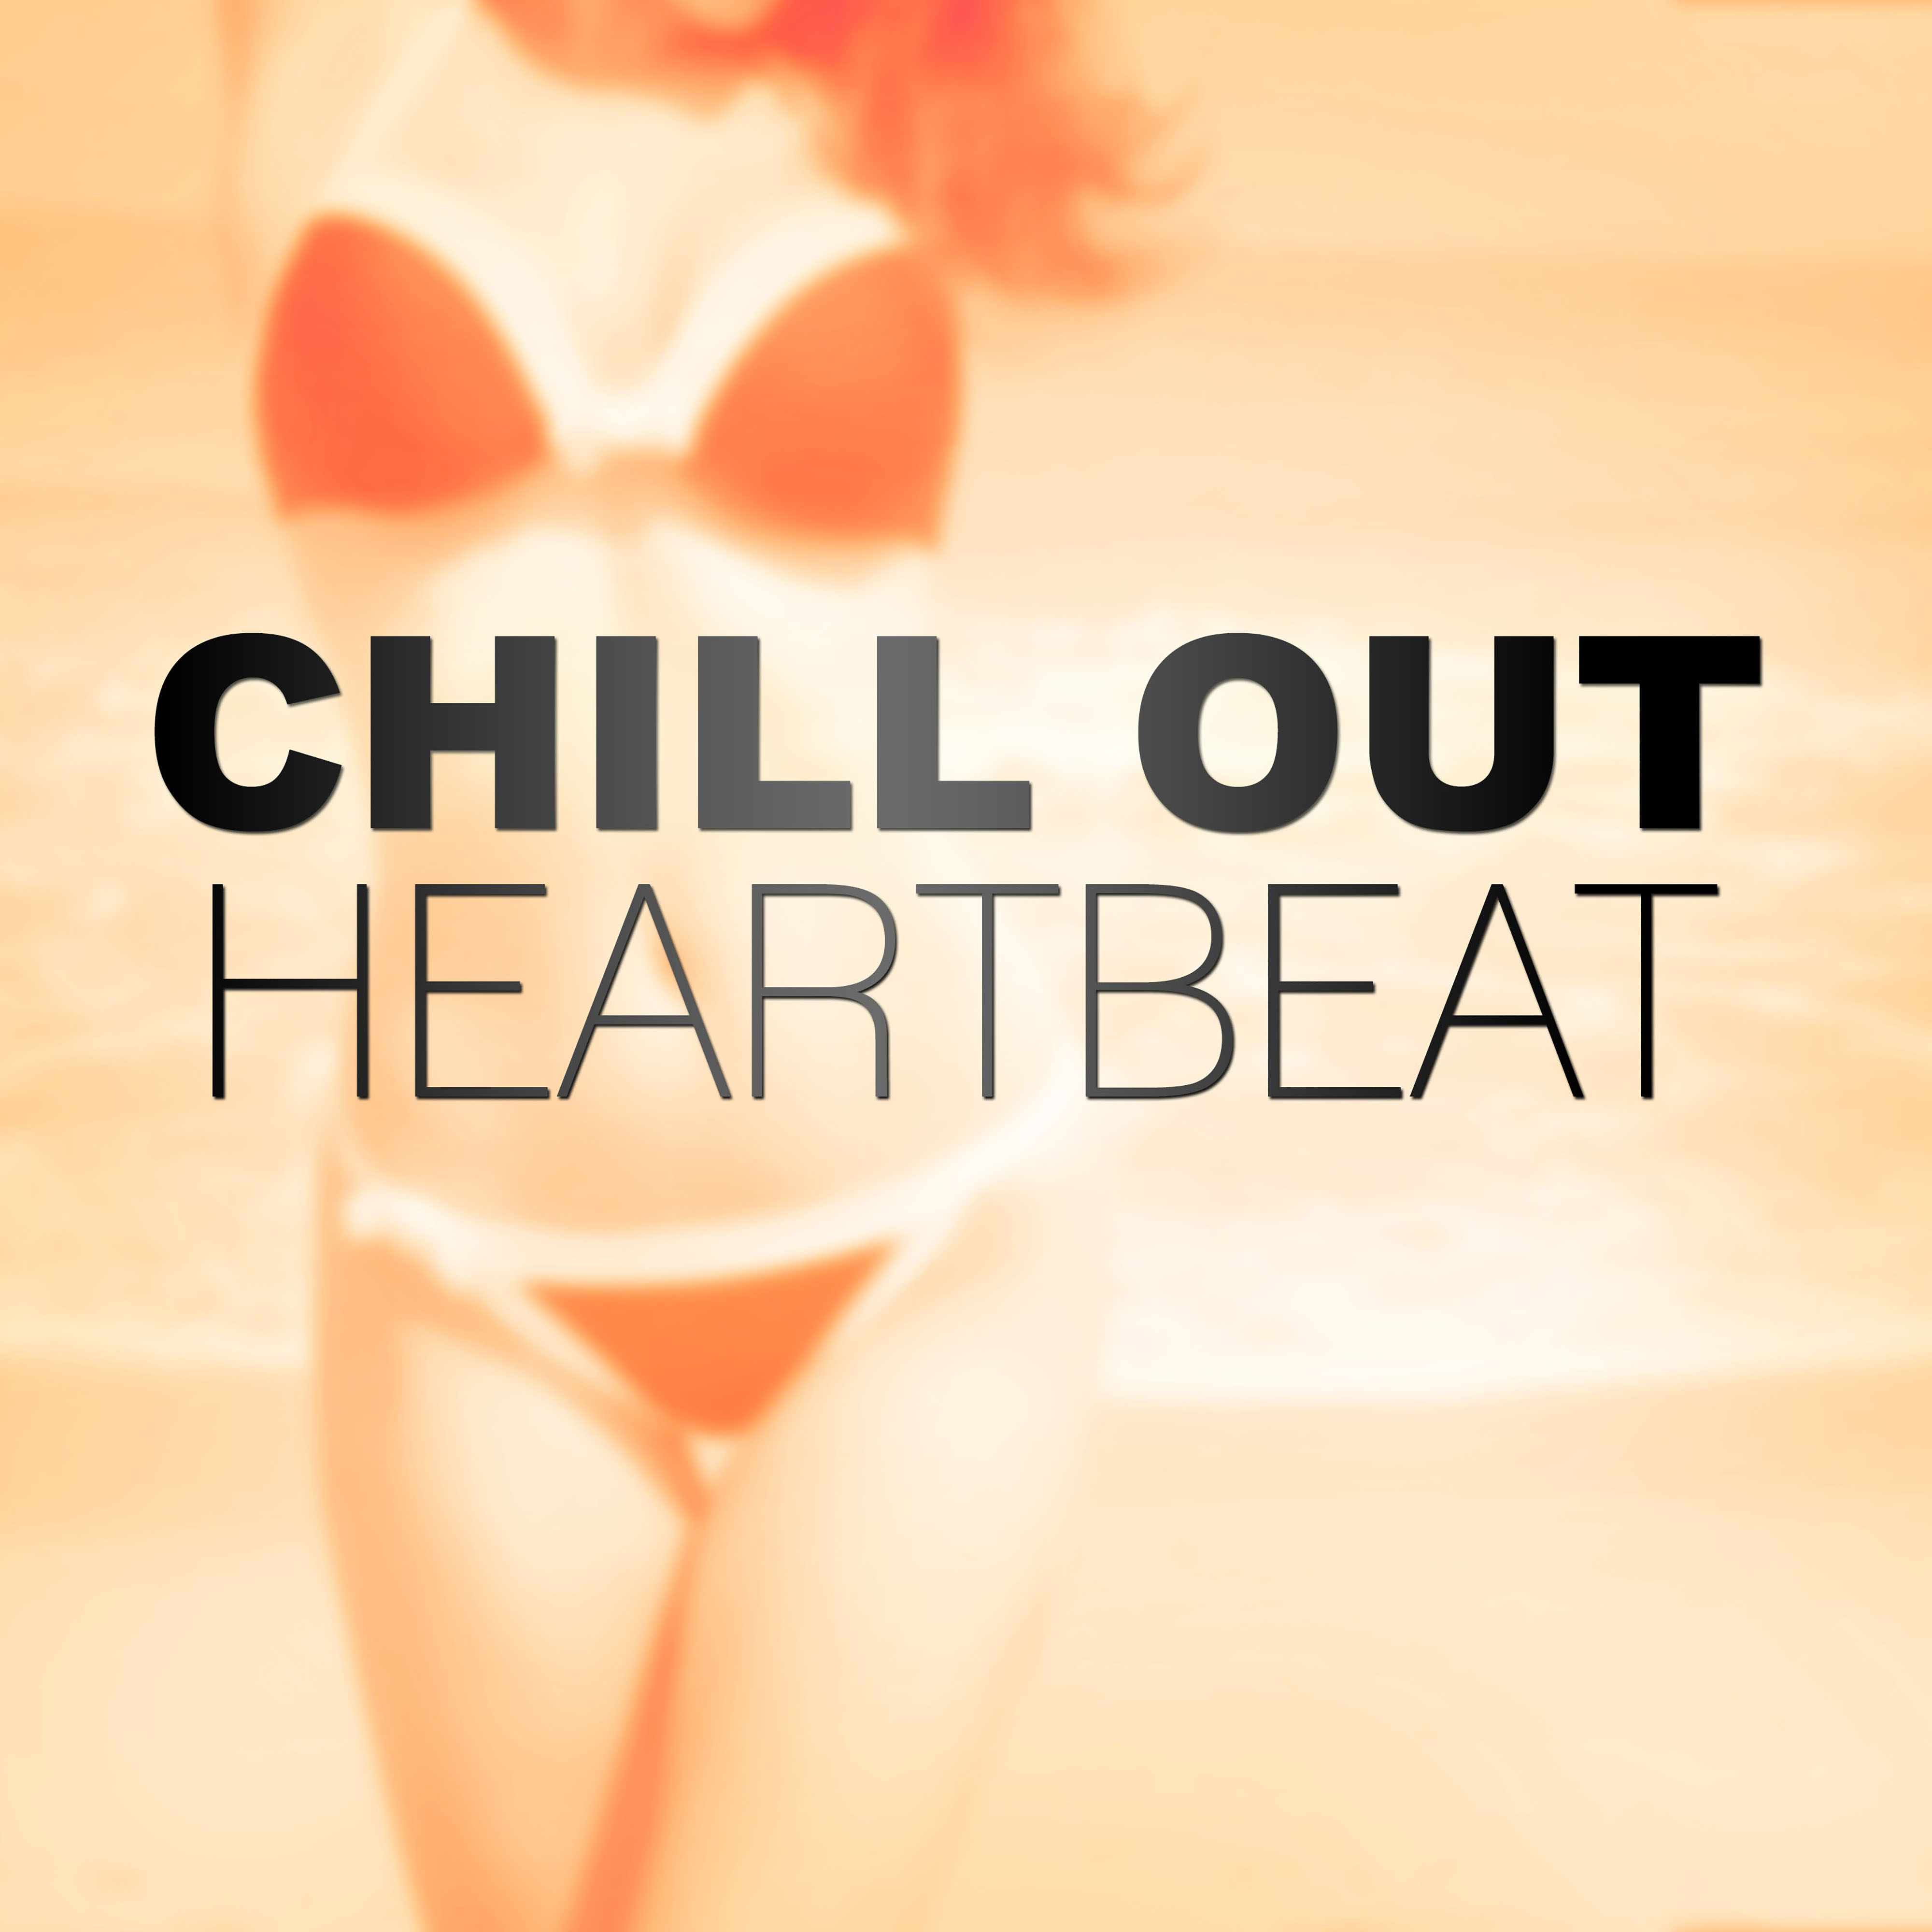 Chill Out Heartbeat  Ambient Chill Out Music, Open Bar  Chill Out Music, Summer Ibiza Chill Out, Finest Selection, Rest, Chill Bar Lounge